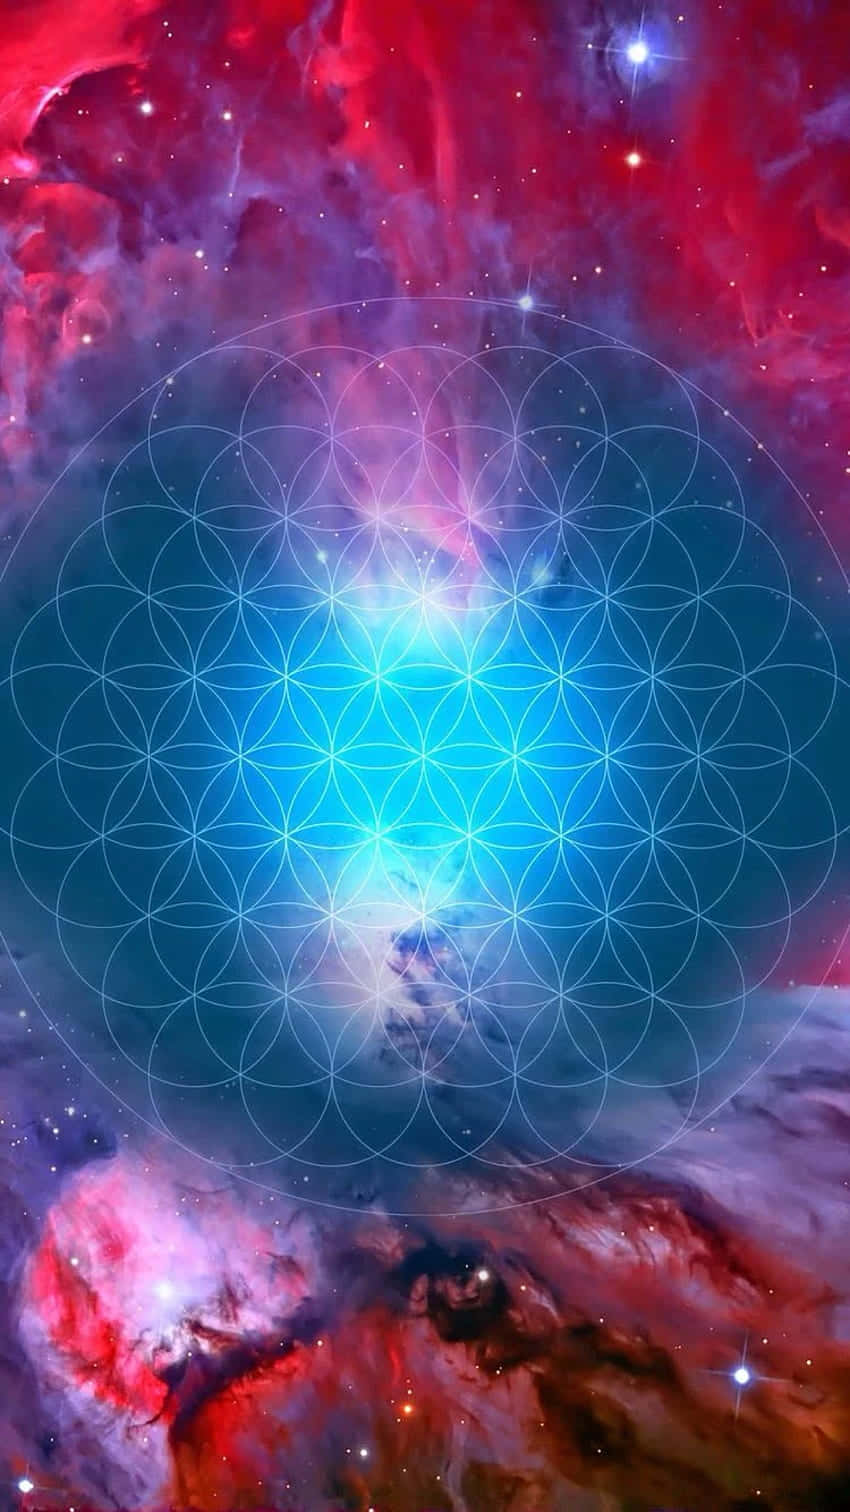 The Flower Of Life In Space Wallpaper